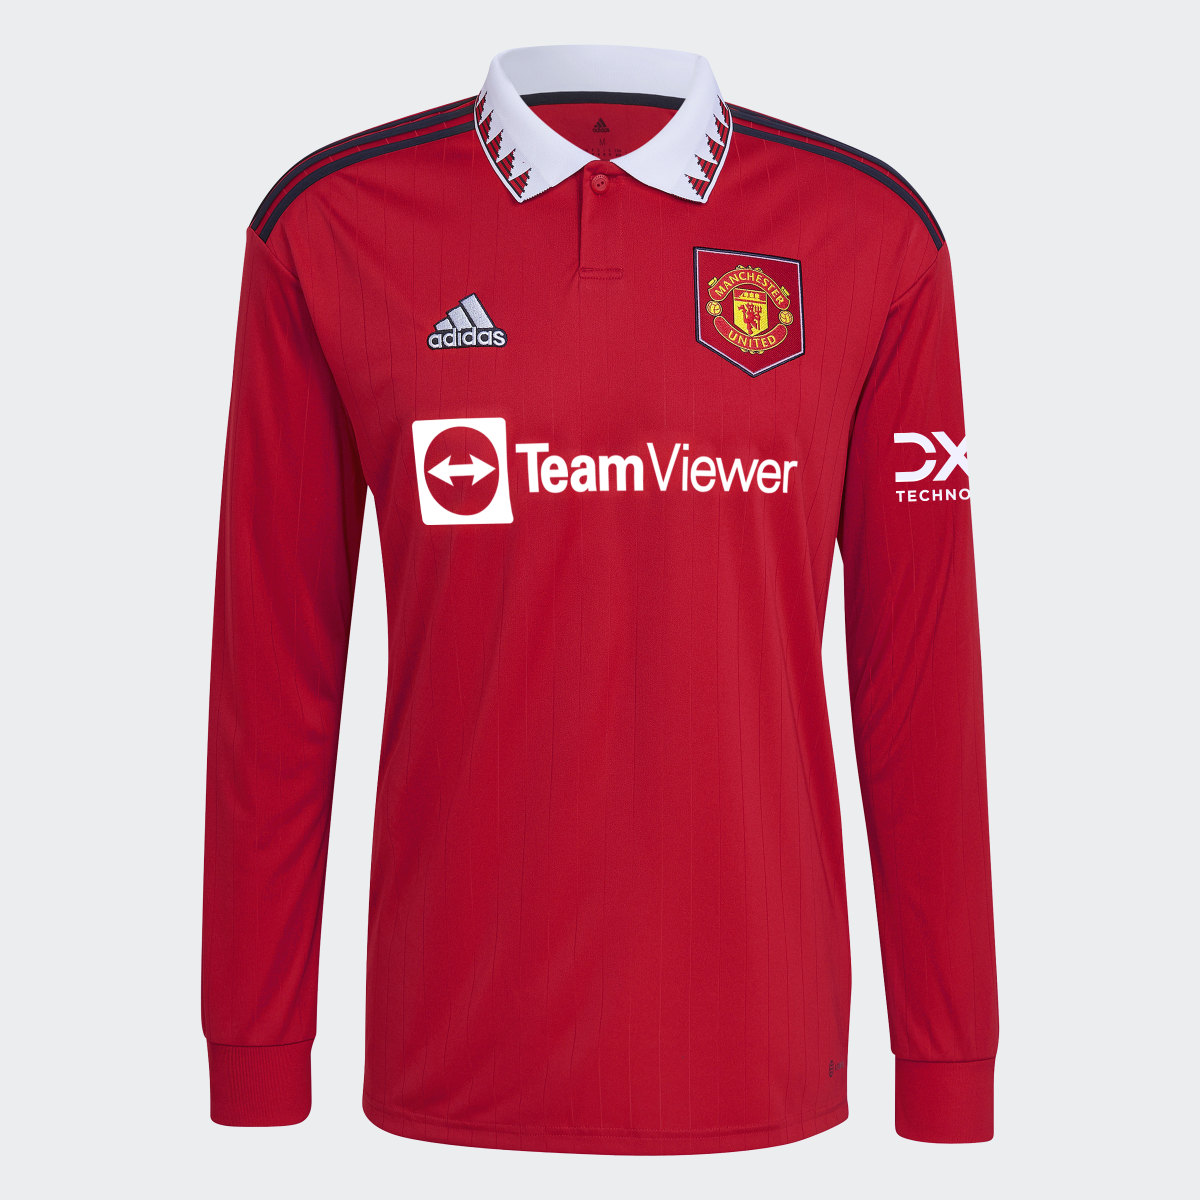 Adidas Manchester United 22/23 Long Sleeve Home Jersey. 5